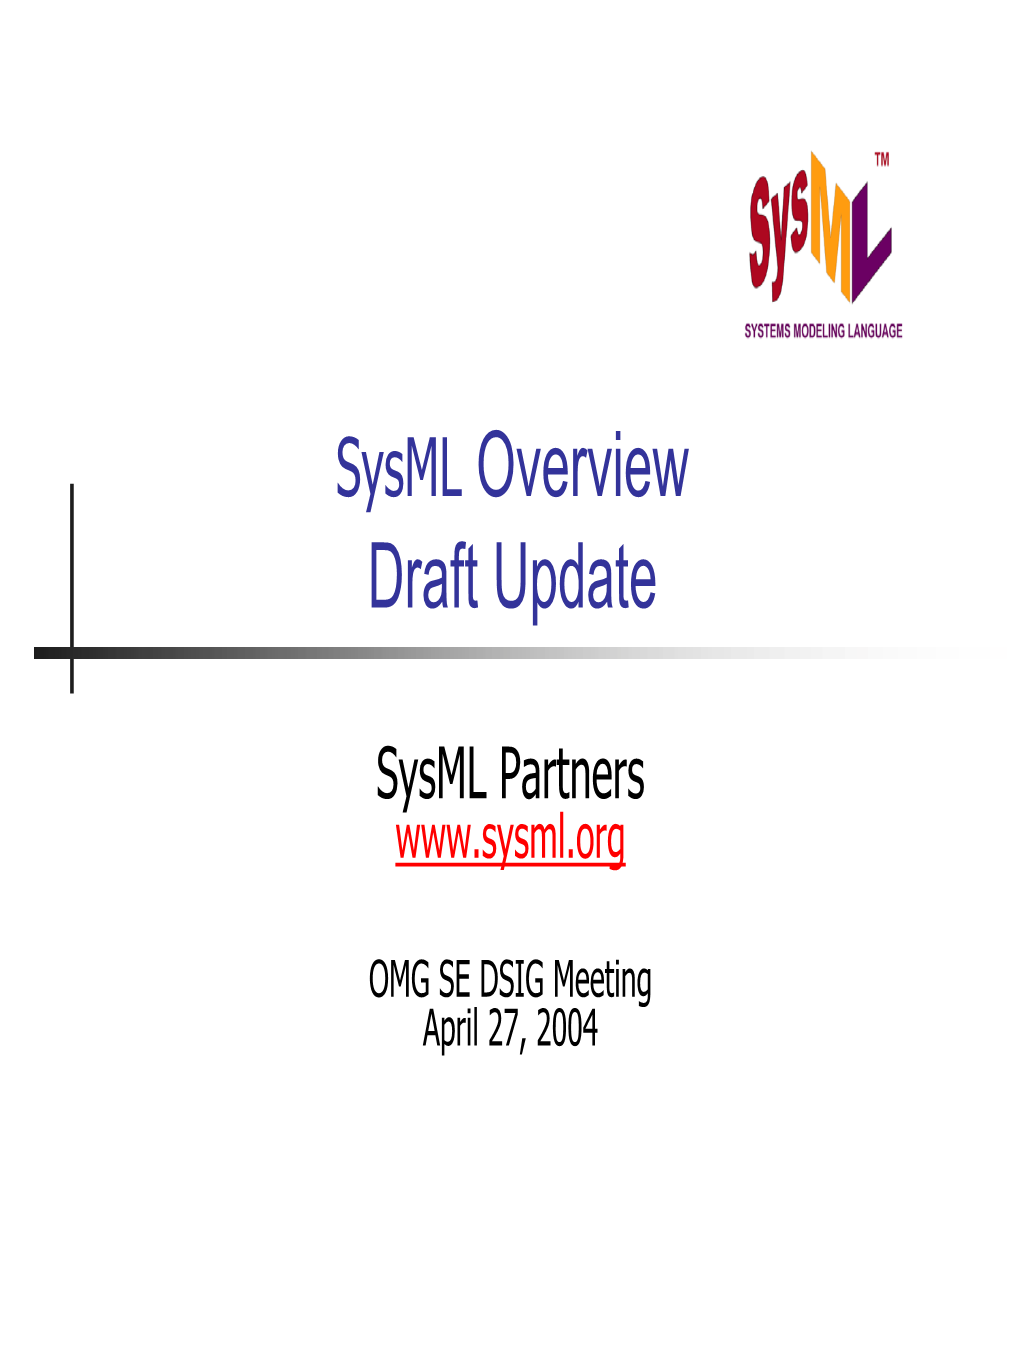 Sysml Overview Draft Update